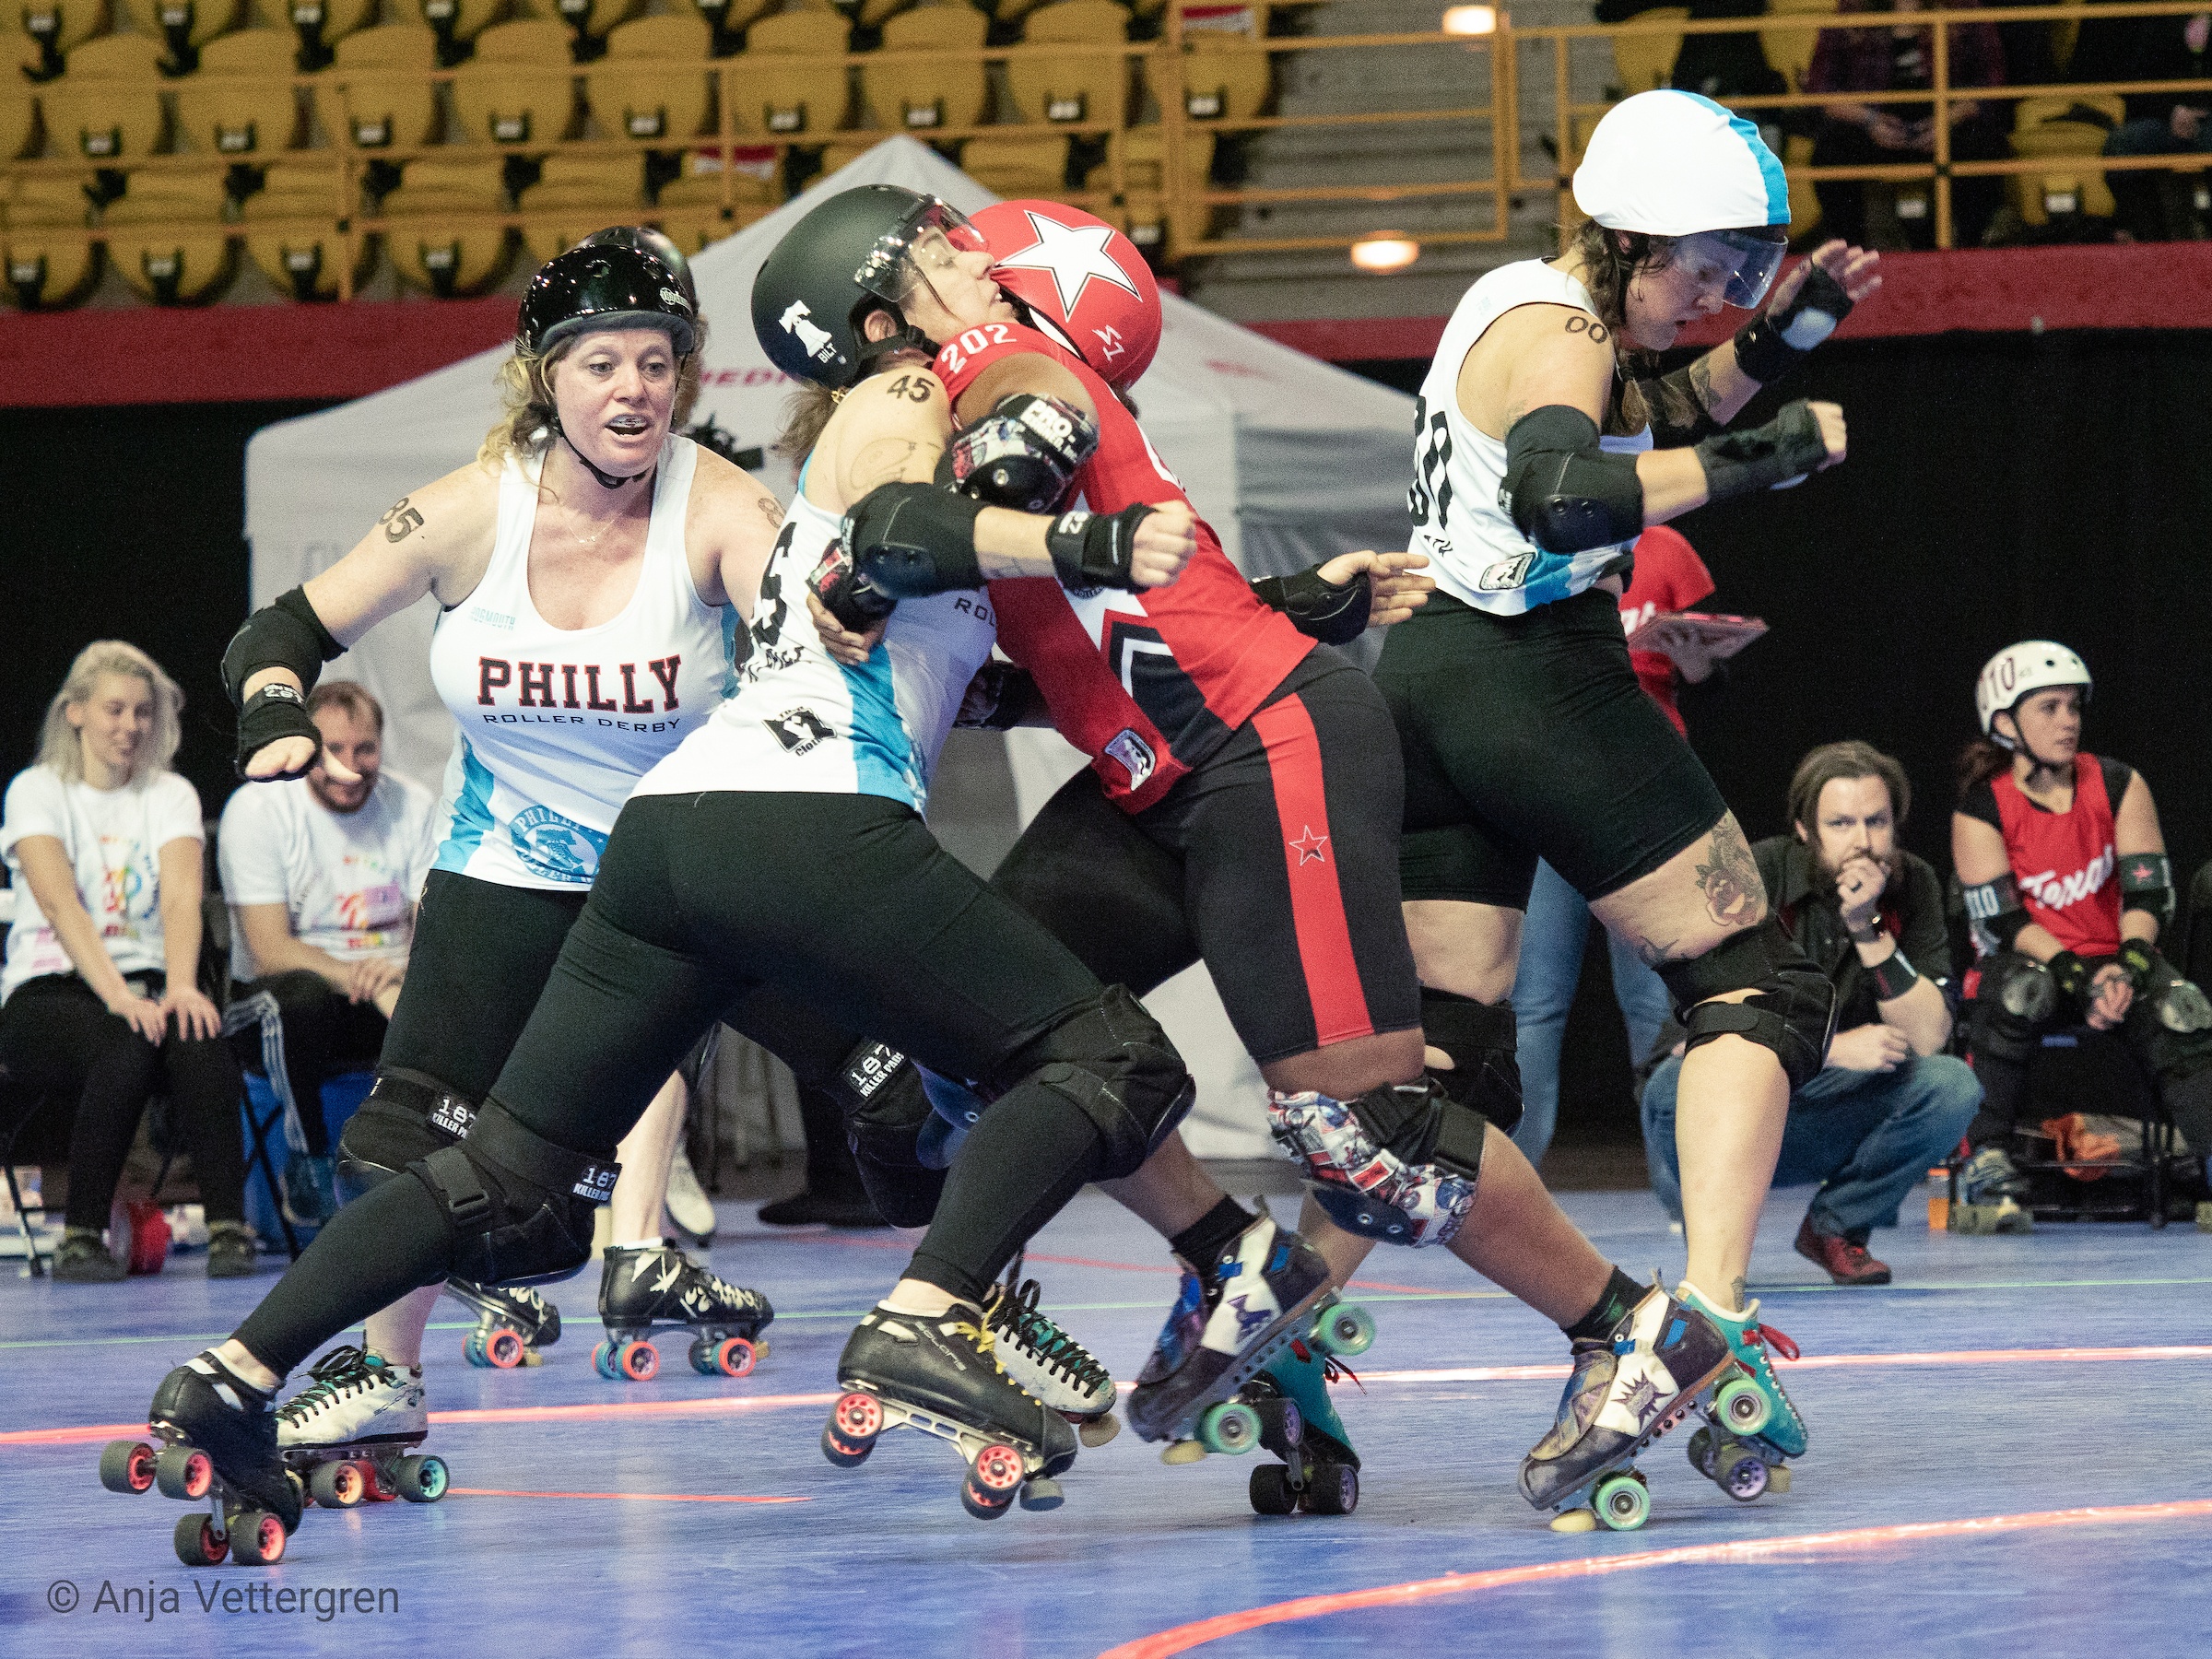 Texas Rollergirls vs Philly Roller Derby in Game 1 of the 2019 International WFTDA Championships